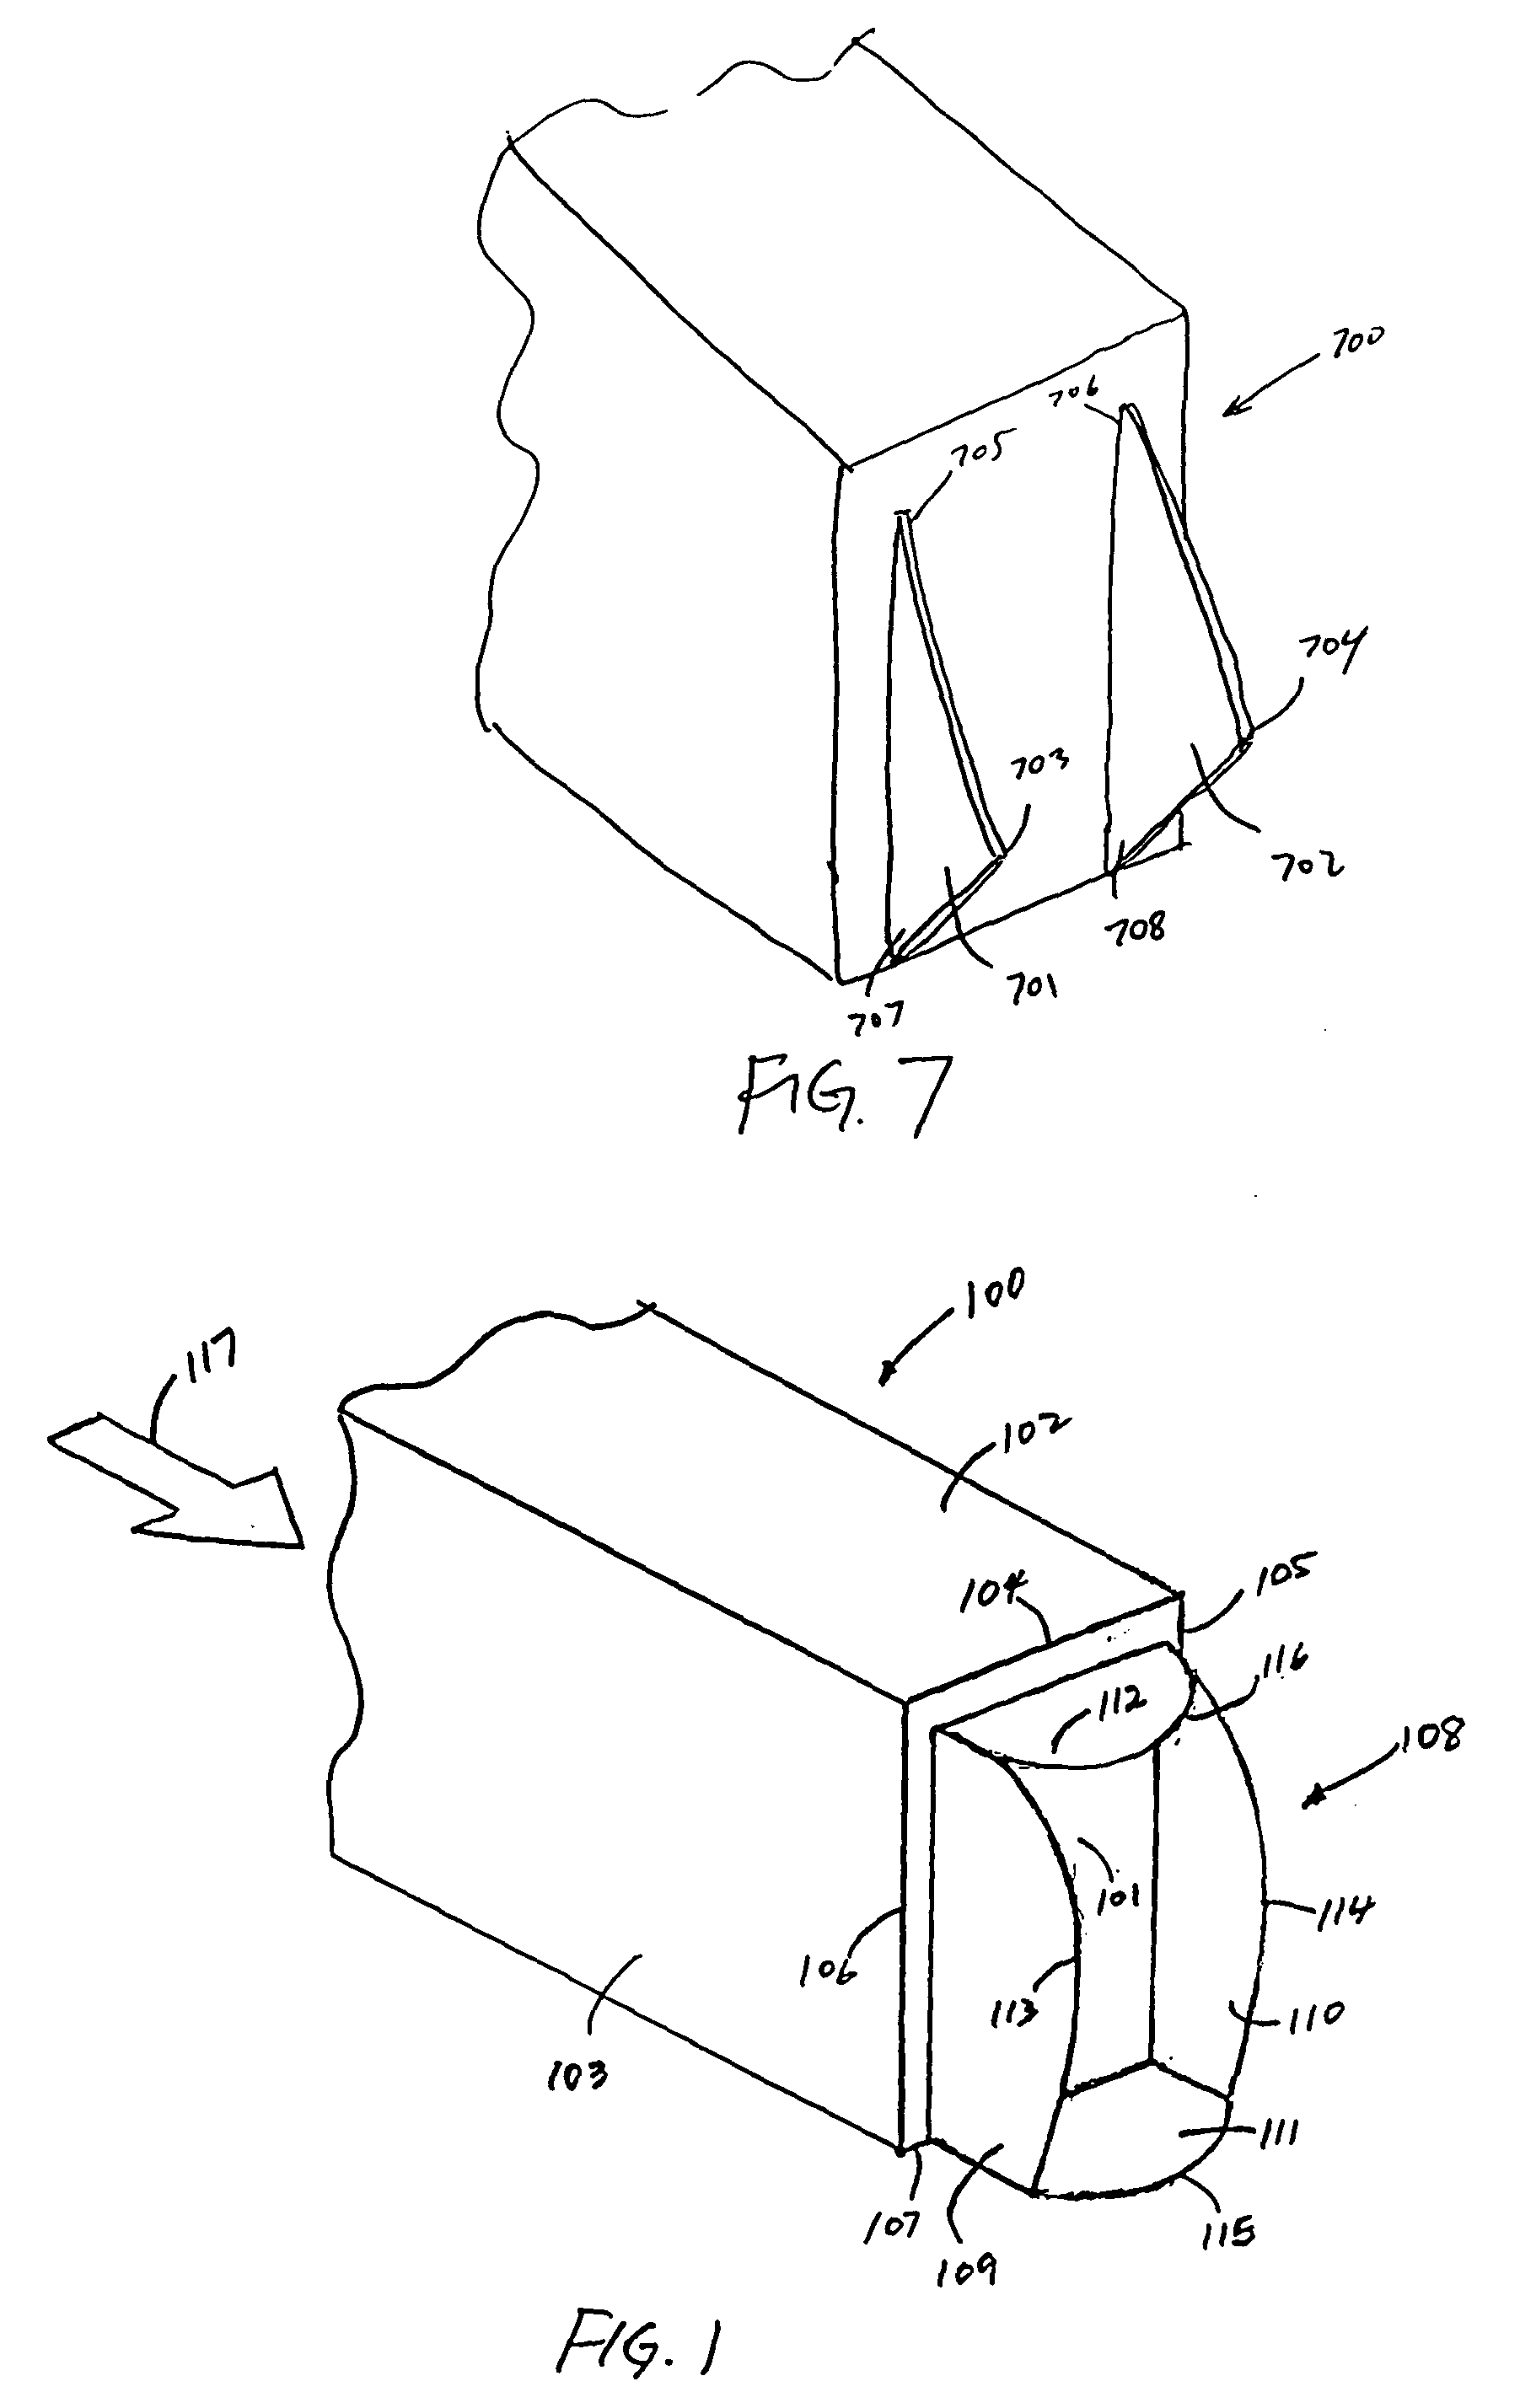 Boattail plates with non-rectangular geometries for reducing aerodynamic base drag of a bluff body in ground effect